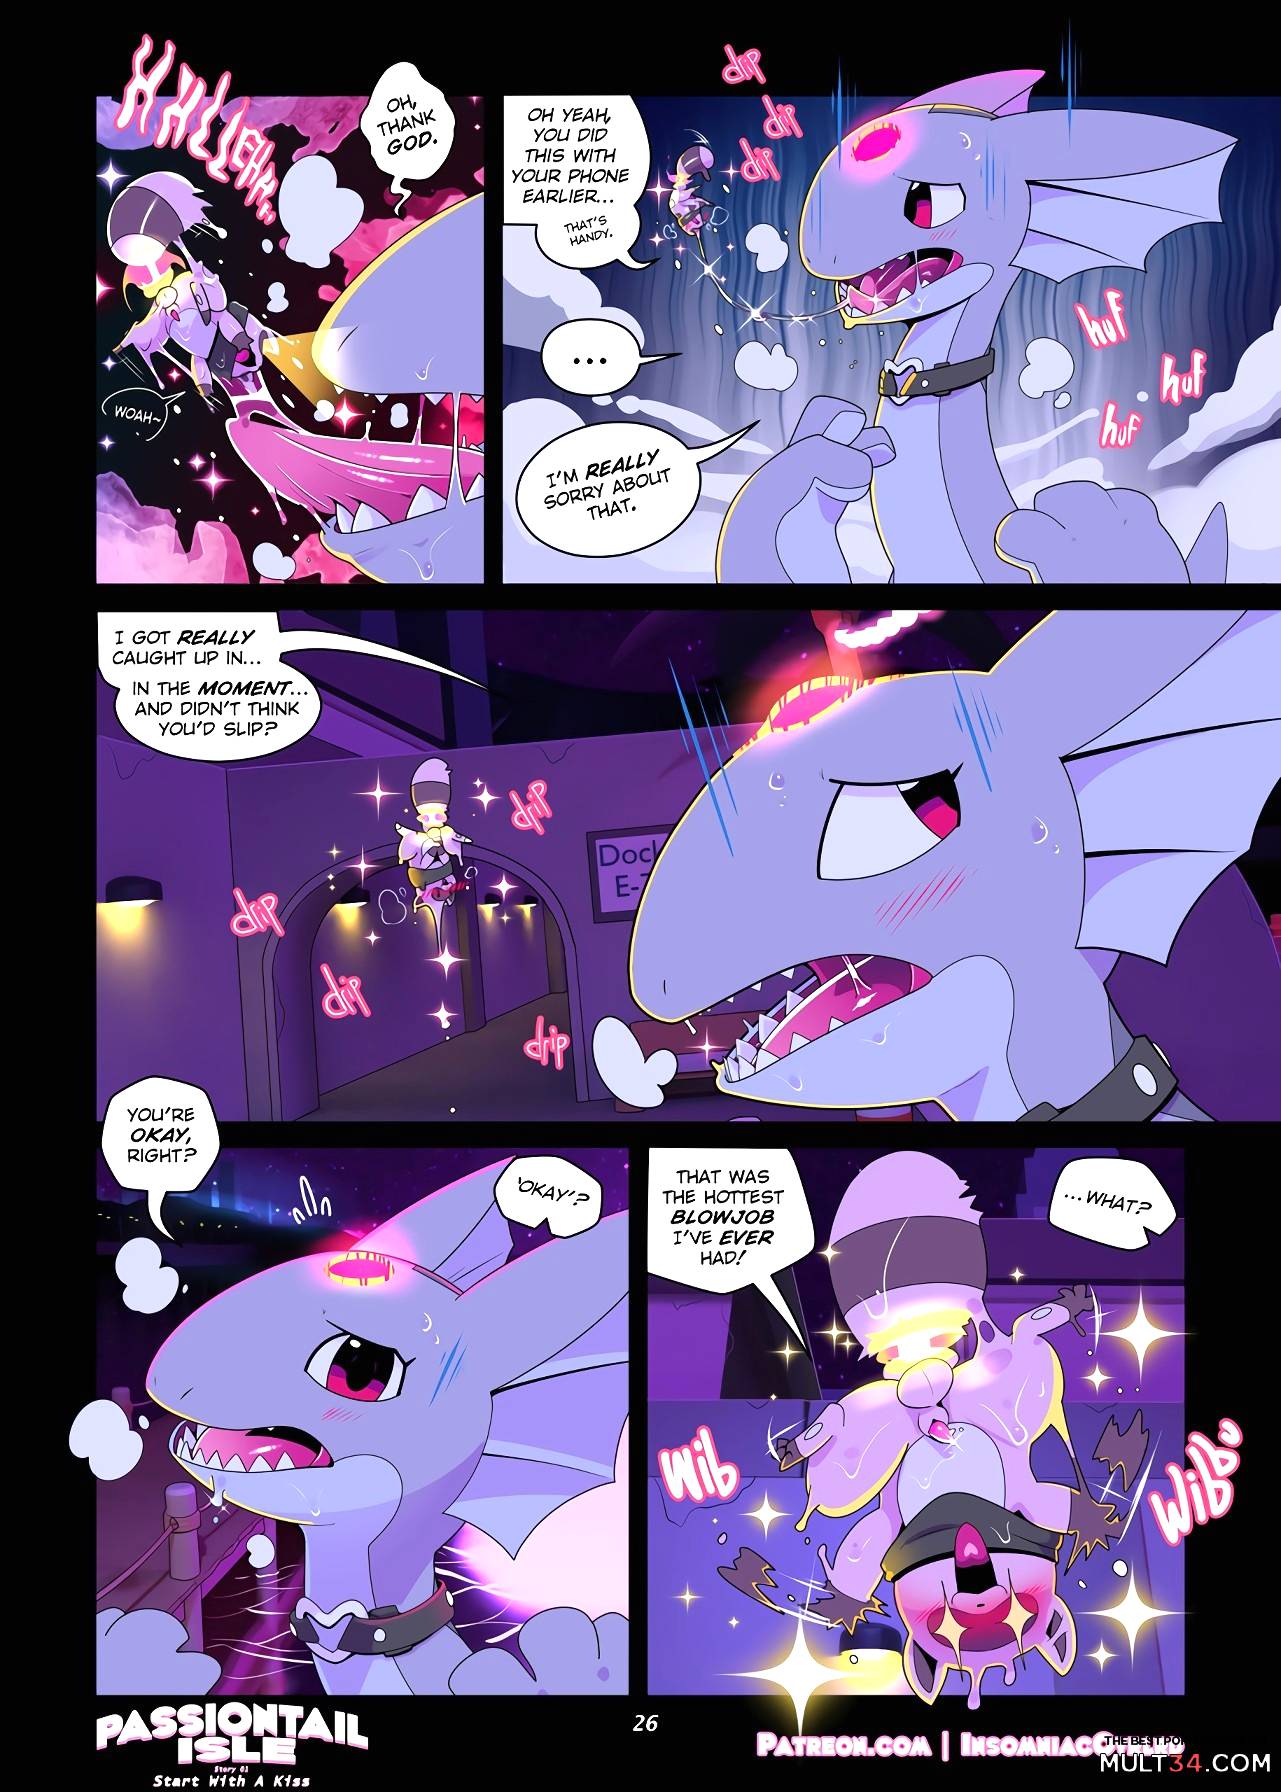 Passiontail Isle by Insomniacovrlrd page 28